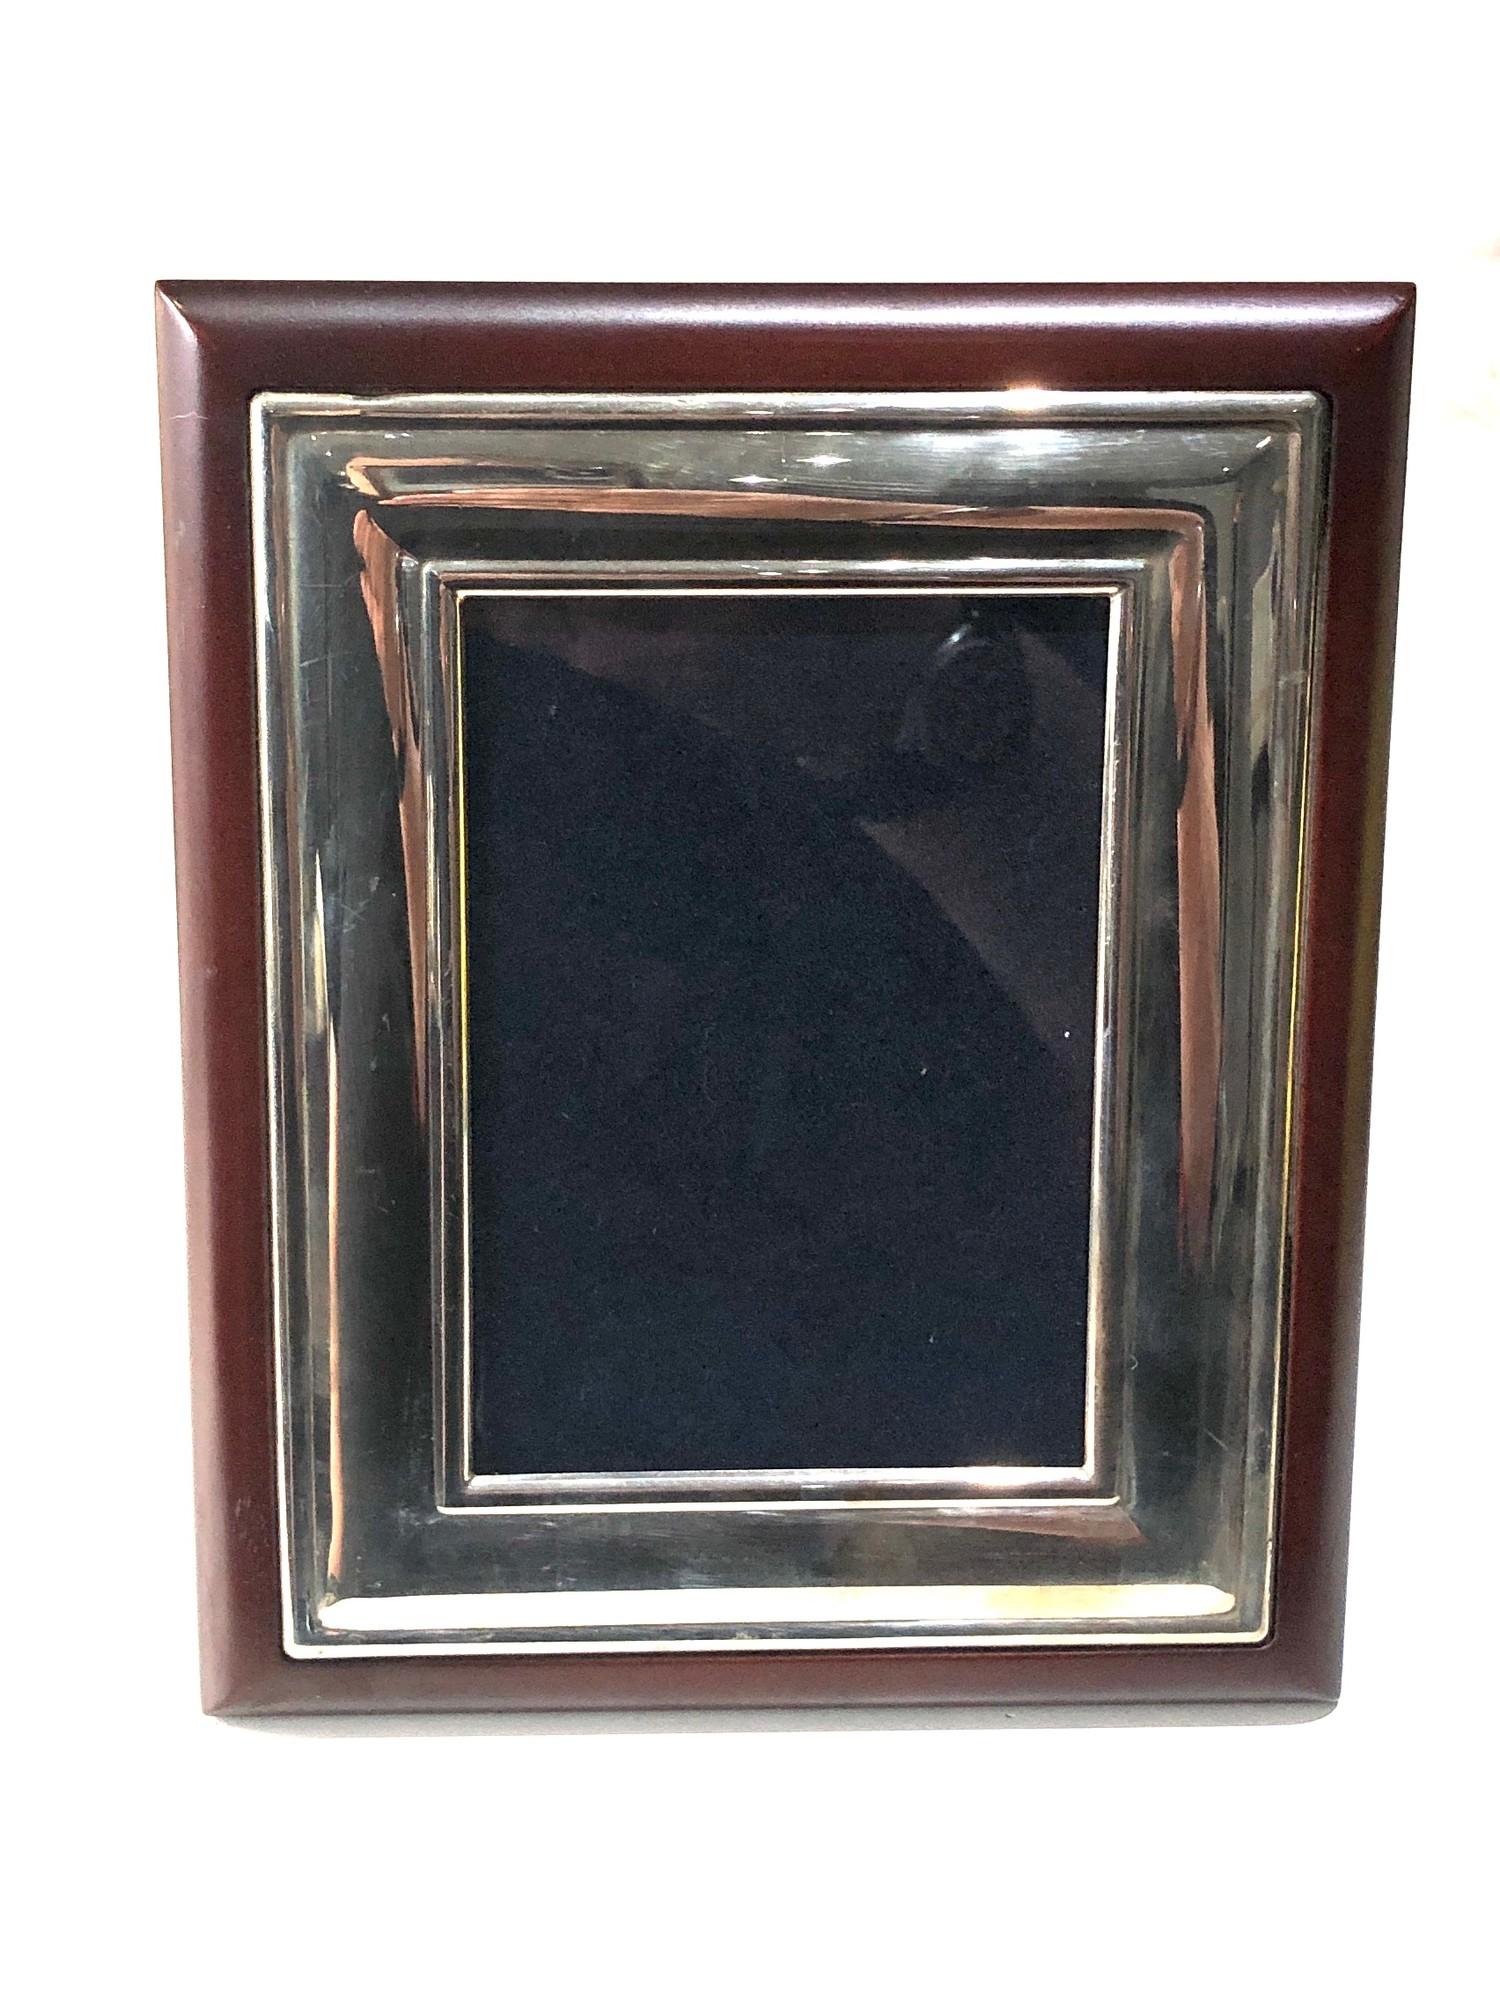 Silver picture picture frame measures approx 20cm by 16.5cm